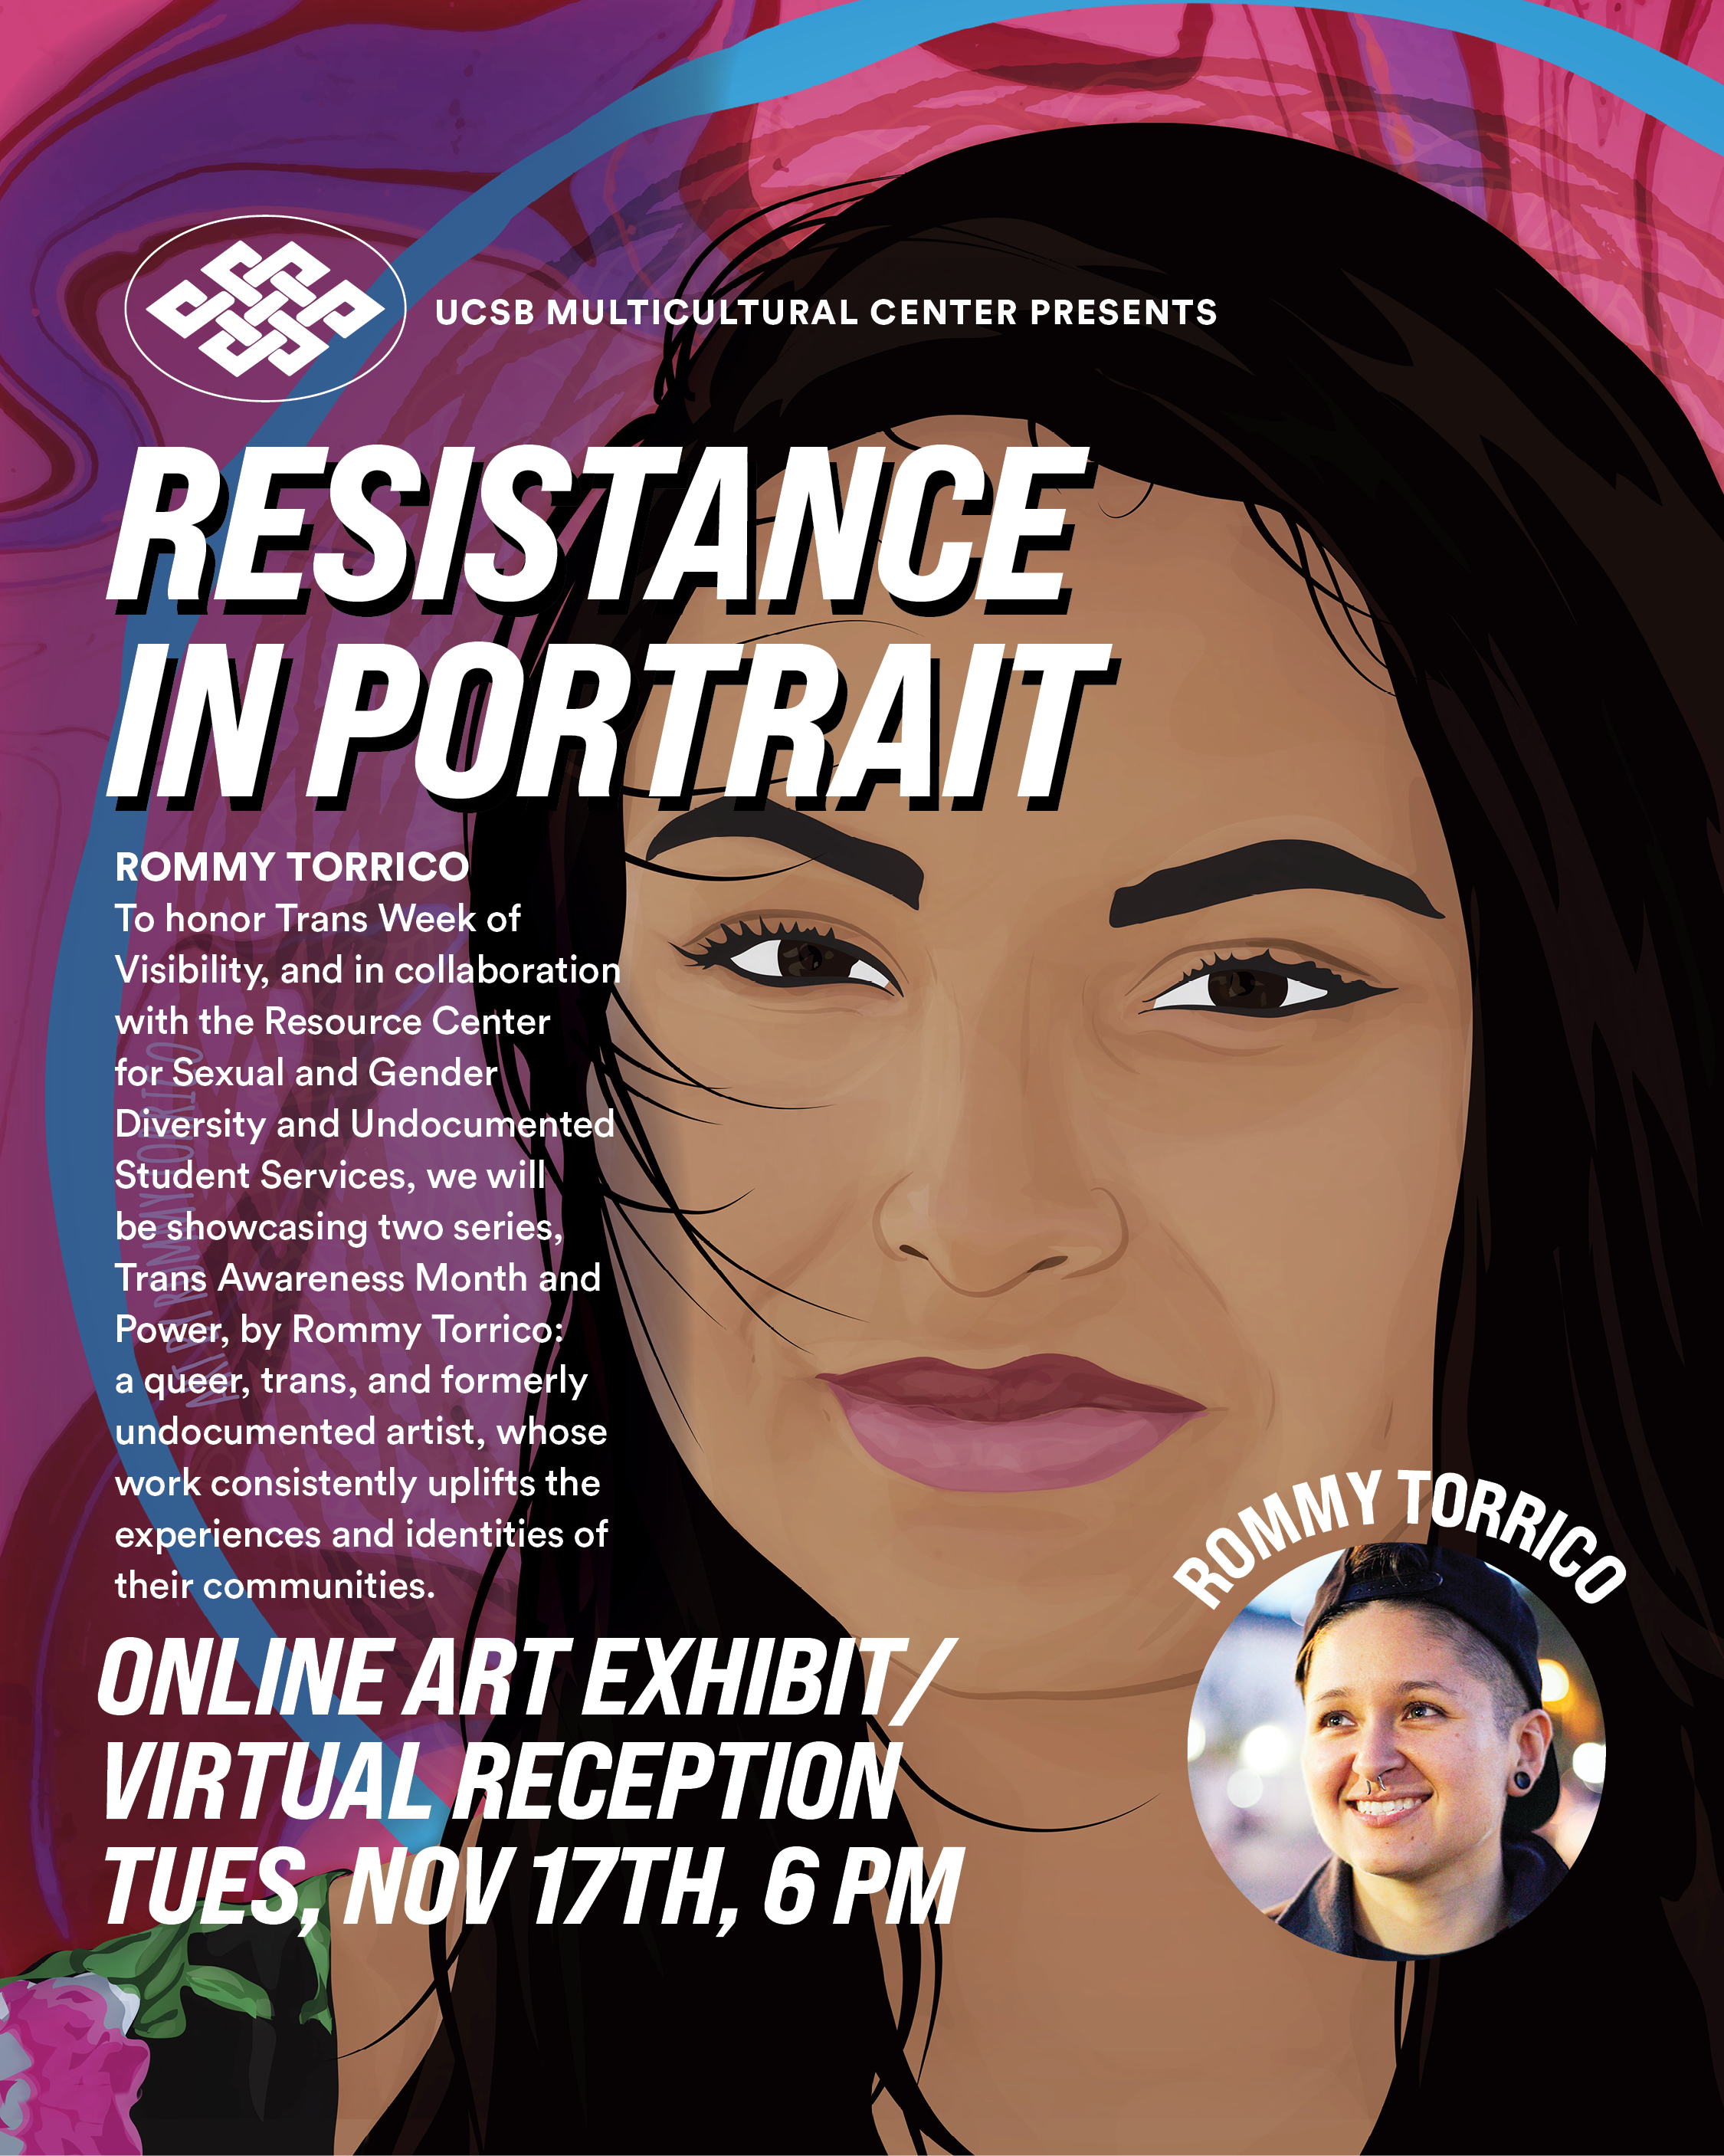 Resistance in Portrait Art Reception with Rommy Torrico